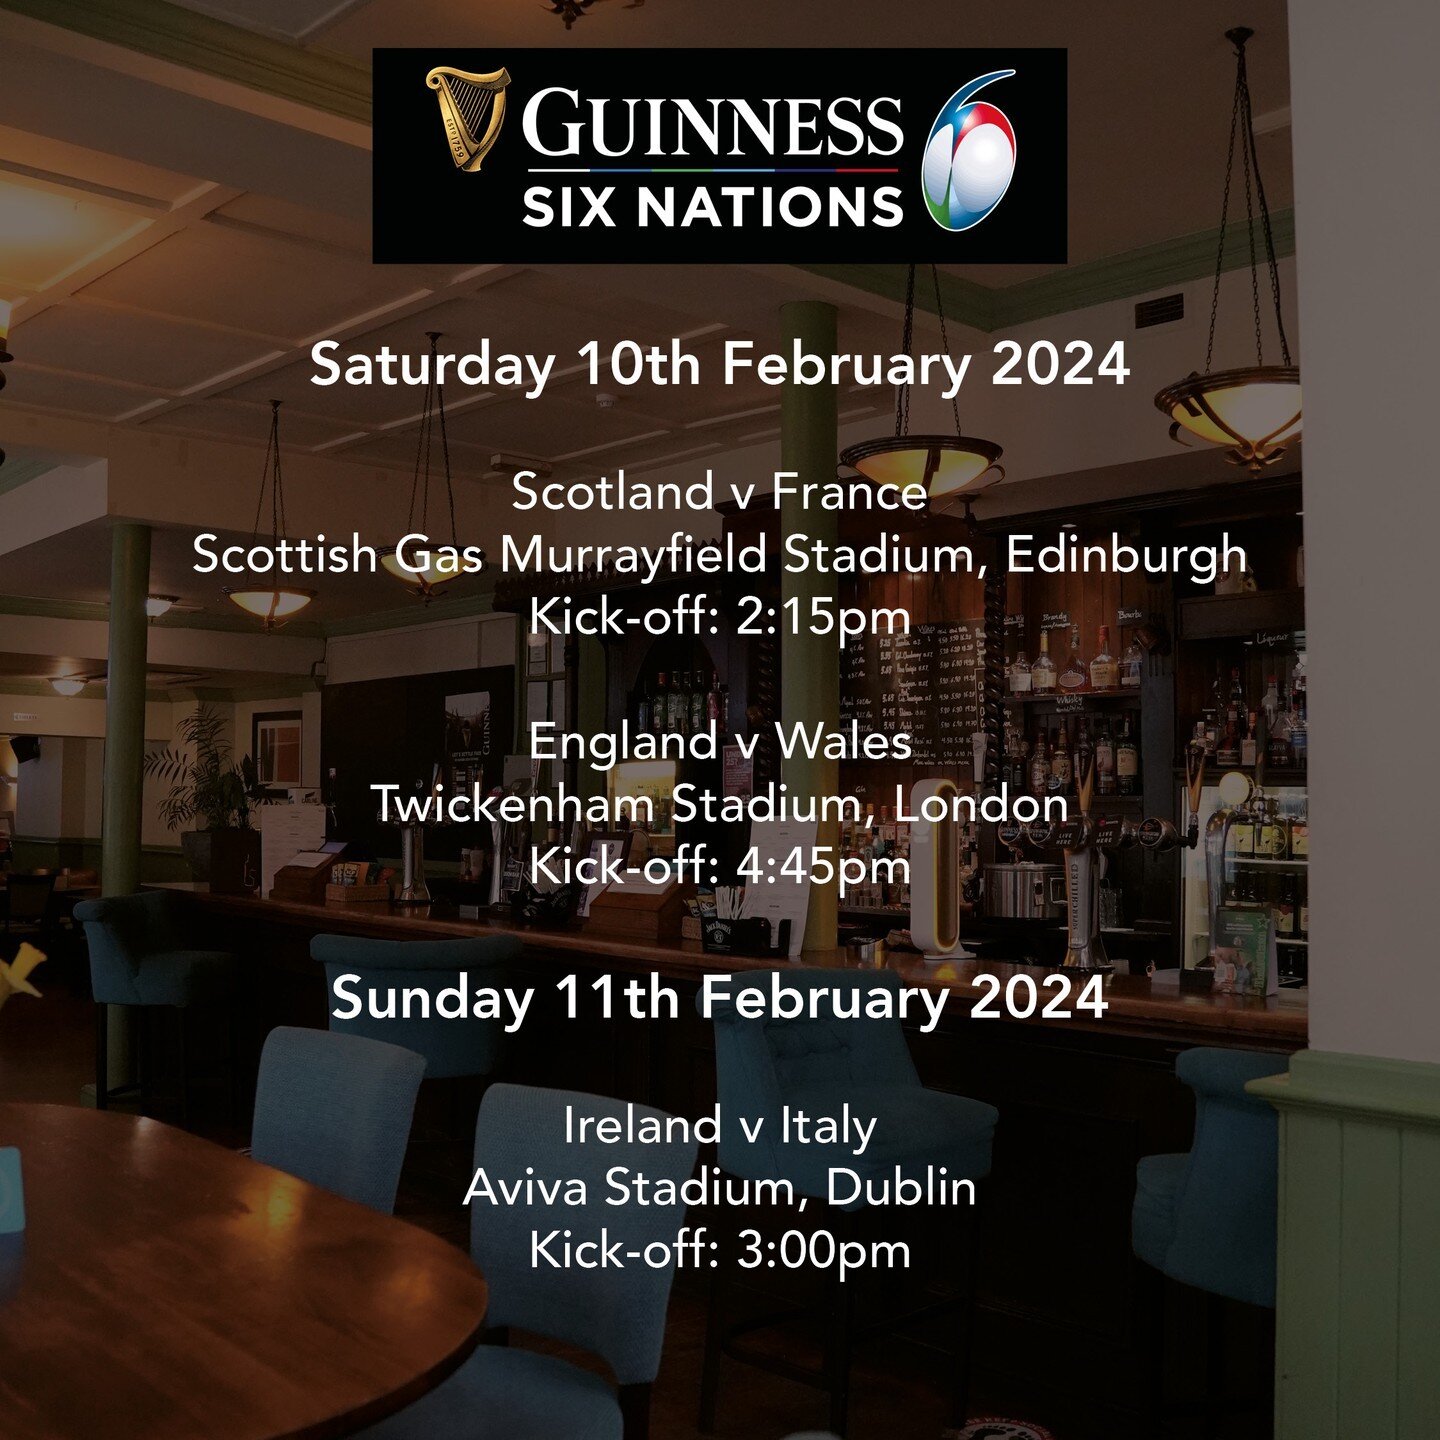 Watch Round 2 of the Rugby Six Nations this weekend at The Junction!

#Redhill #SixNations #Rugby